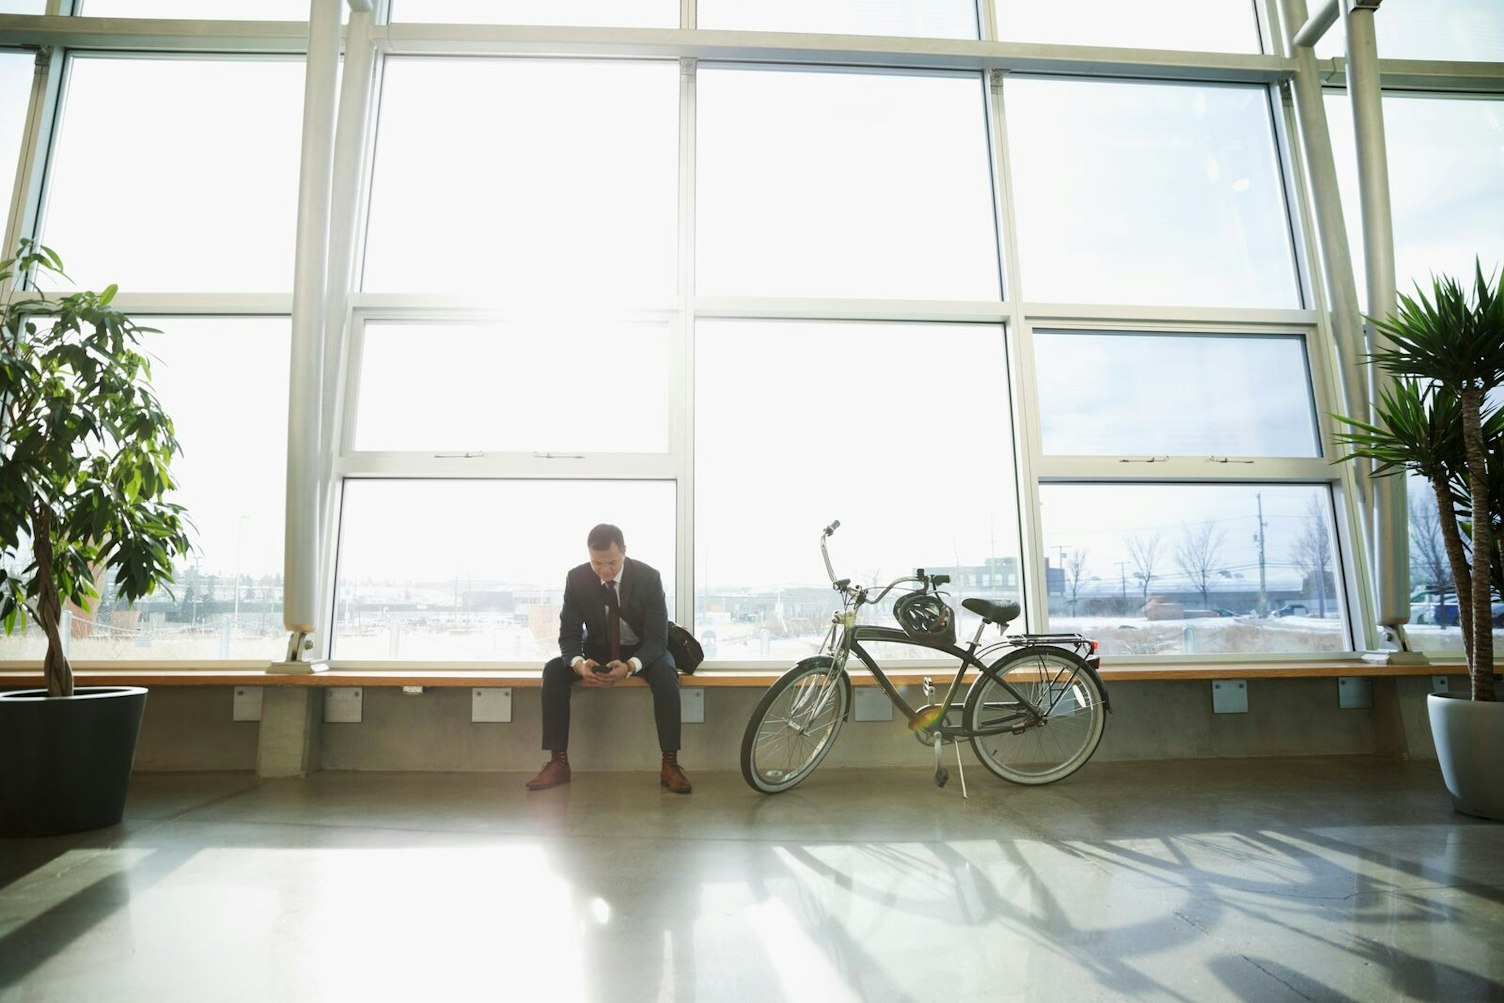 Businessman Sitting next to his Bicycle Waiting in Public Transit Area